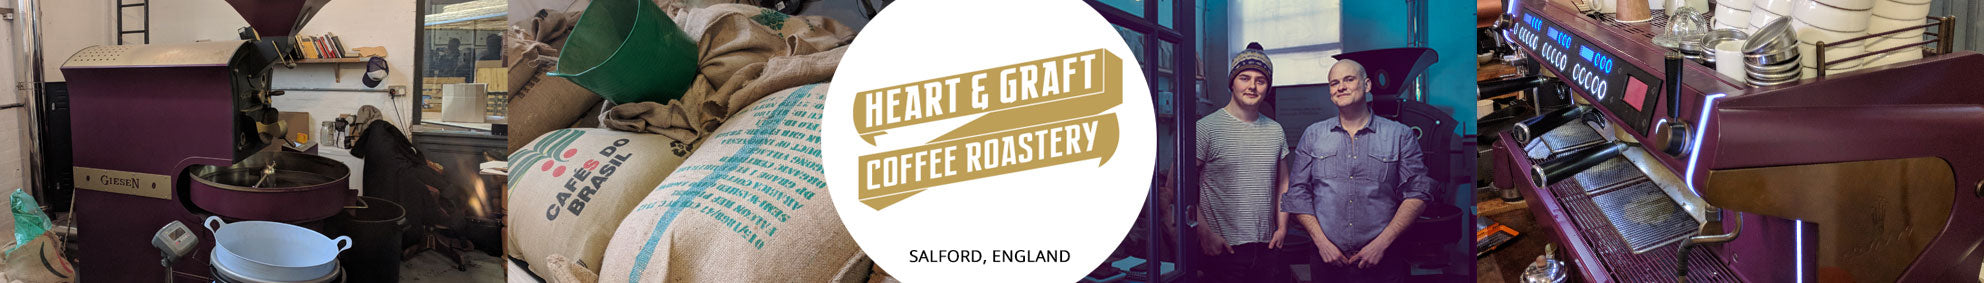 Heart and Graft Coffee Roasters